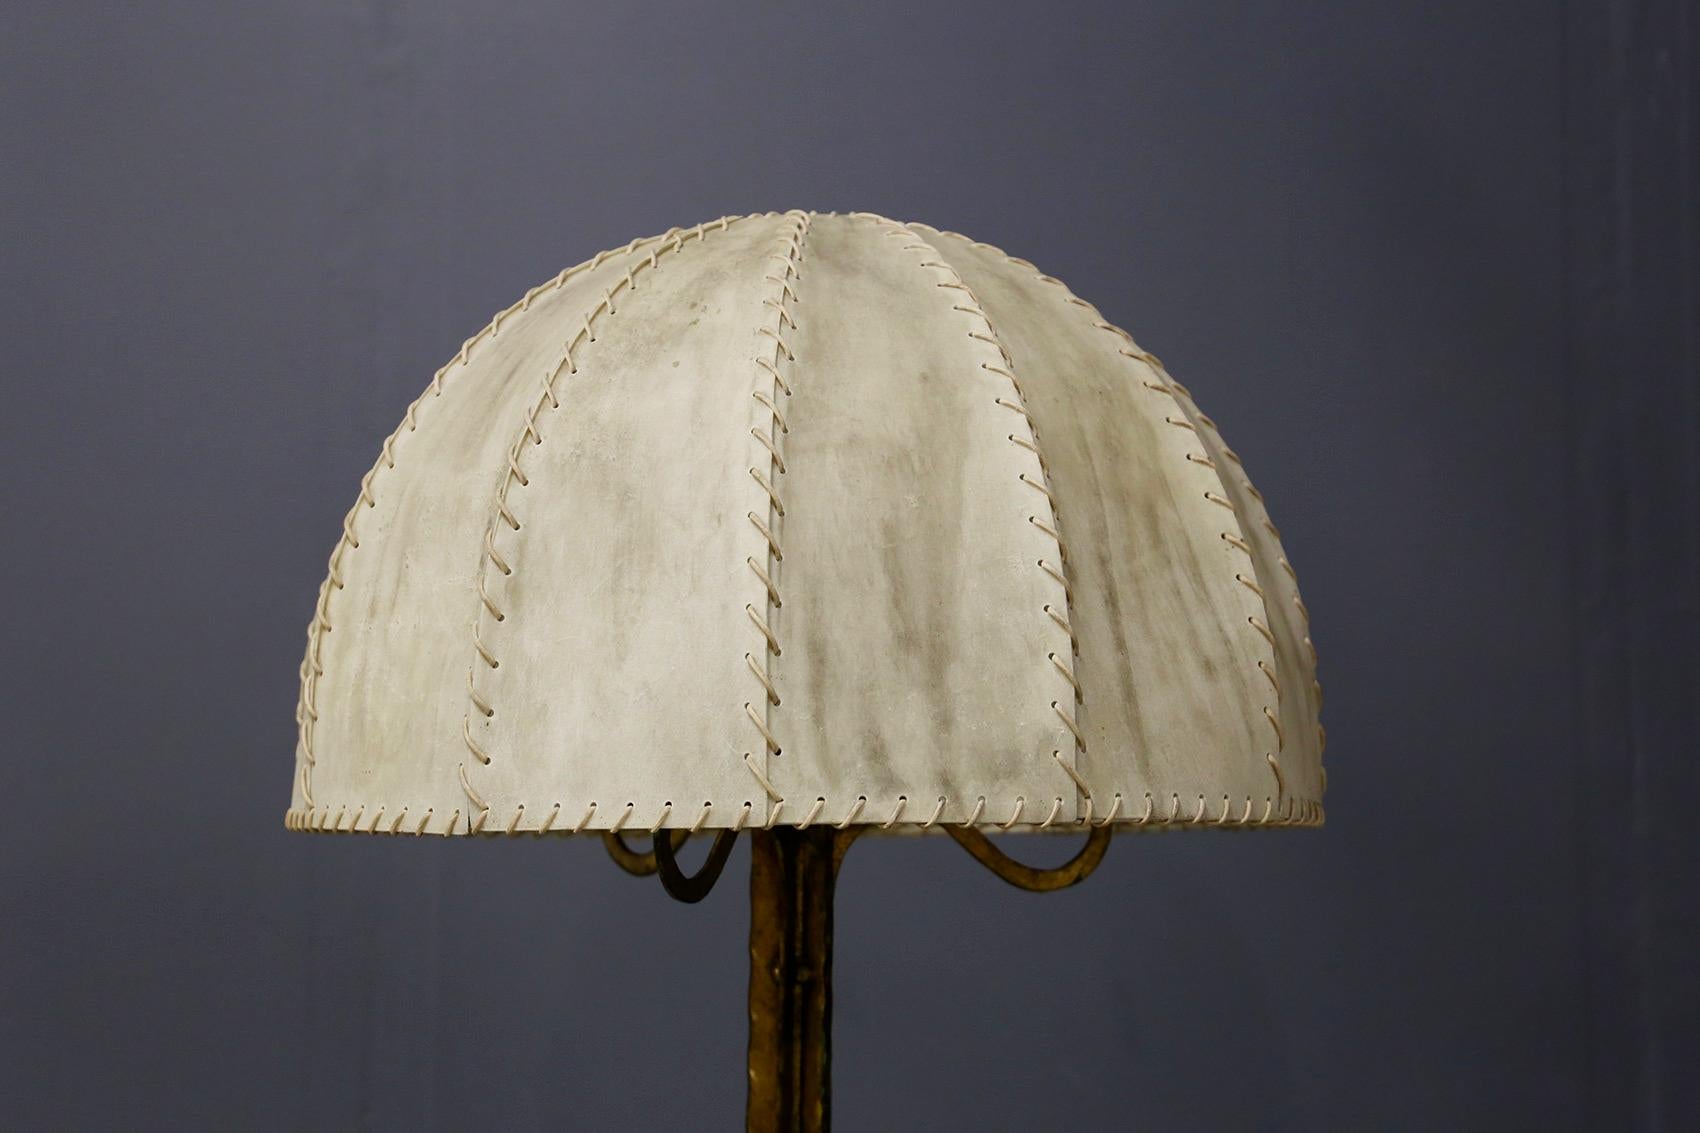 Elegant French floor lamp by Marc Du Plantier in very good condition. The lamp has a semi-circular hat covered in parchment and sewn together by a cotton thread. The structure of the lamp is made of brass worked not regular. The base of the lamp is